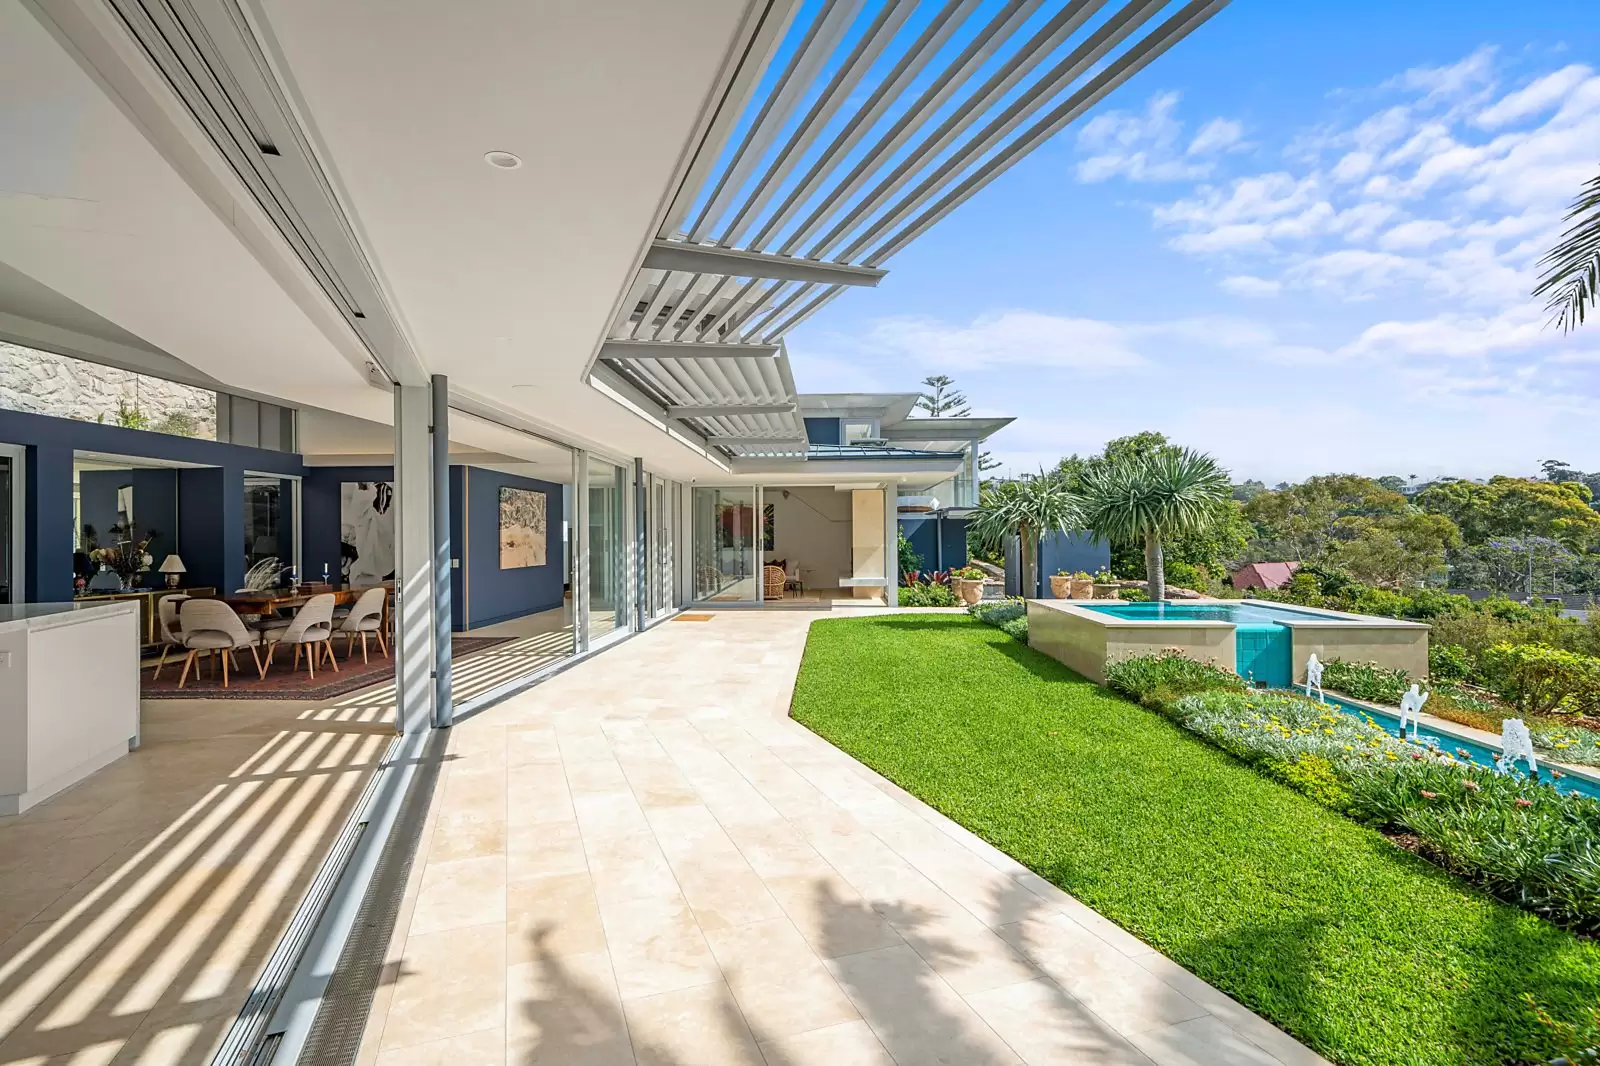 Photo #5: 97 Wentworth Road, Vaucluse - For Sale by Sydney Sotheby's International Realty